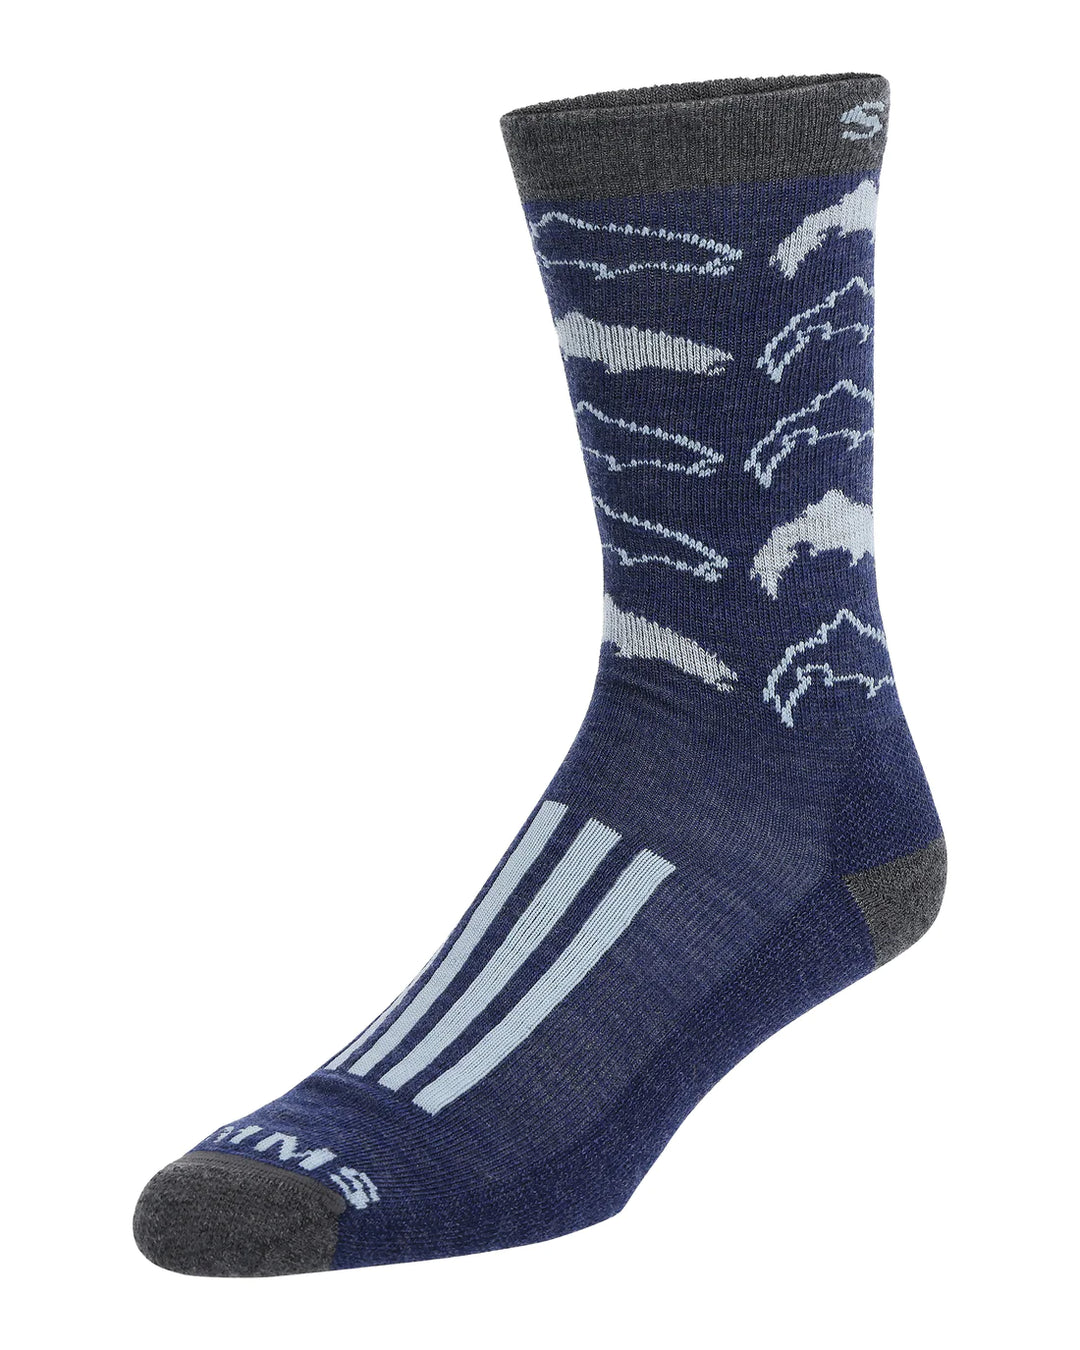 Simms - M's Daily Sock - Navy